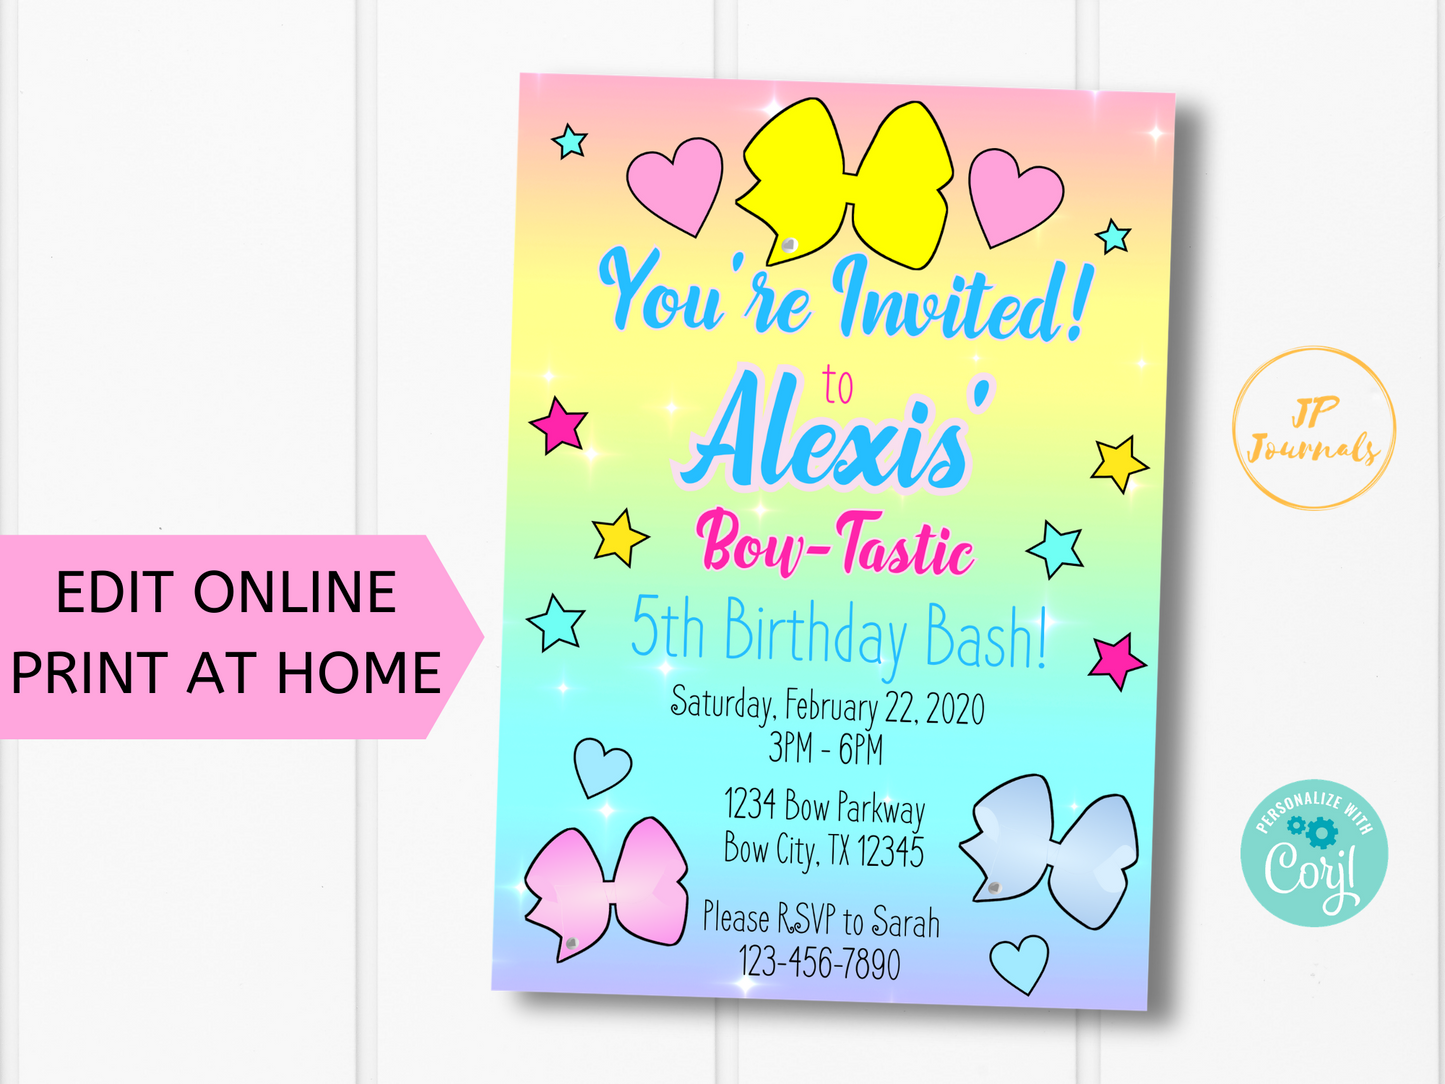 Pastel Bows Birthday Party Invitation for Girls Digital Template - Download, Edit and Print at Home!